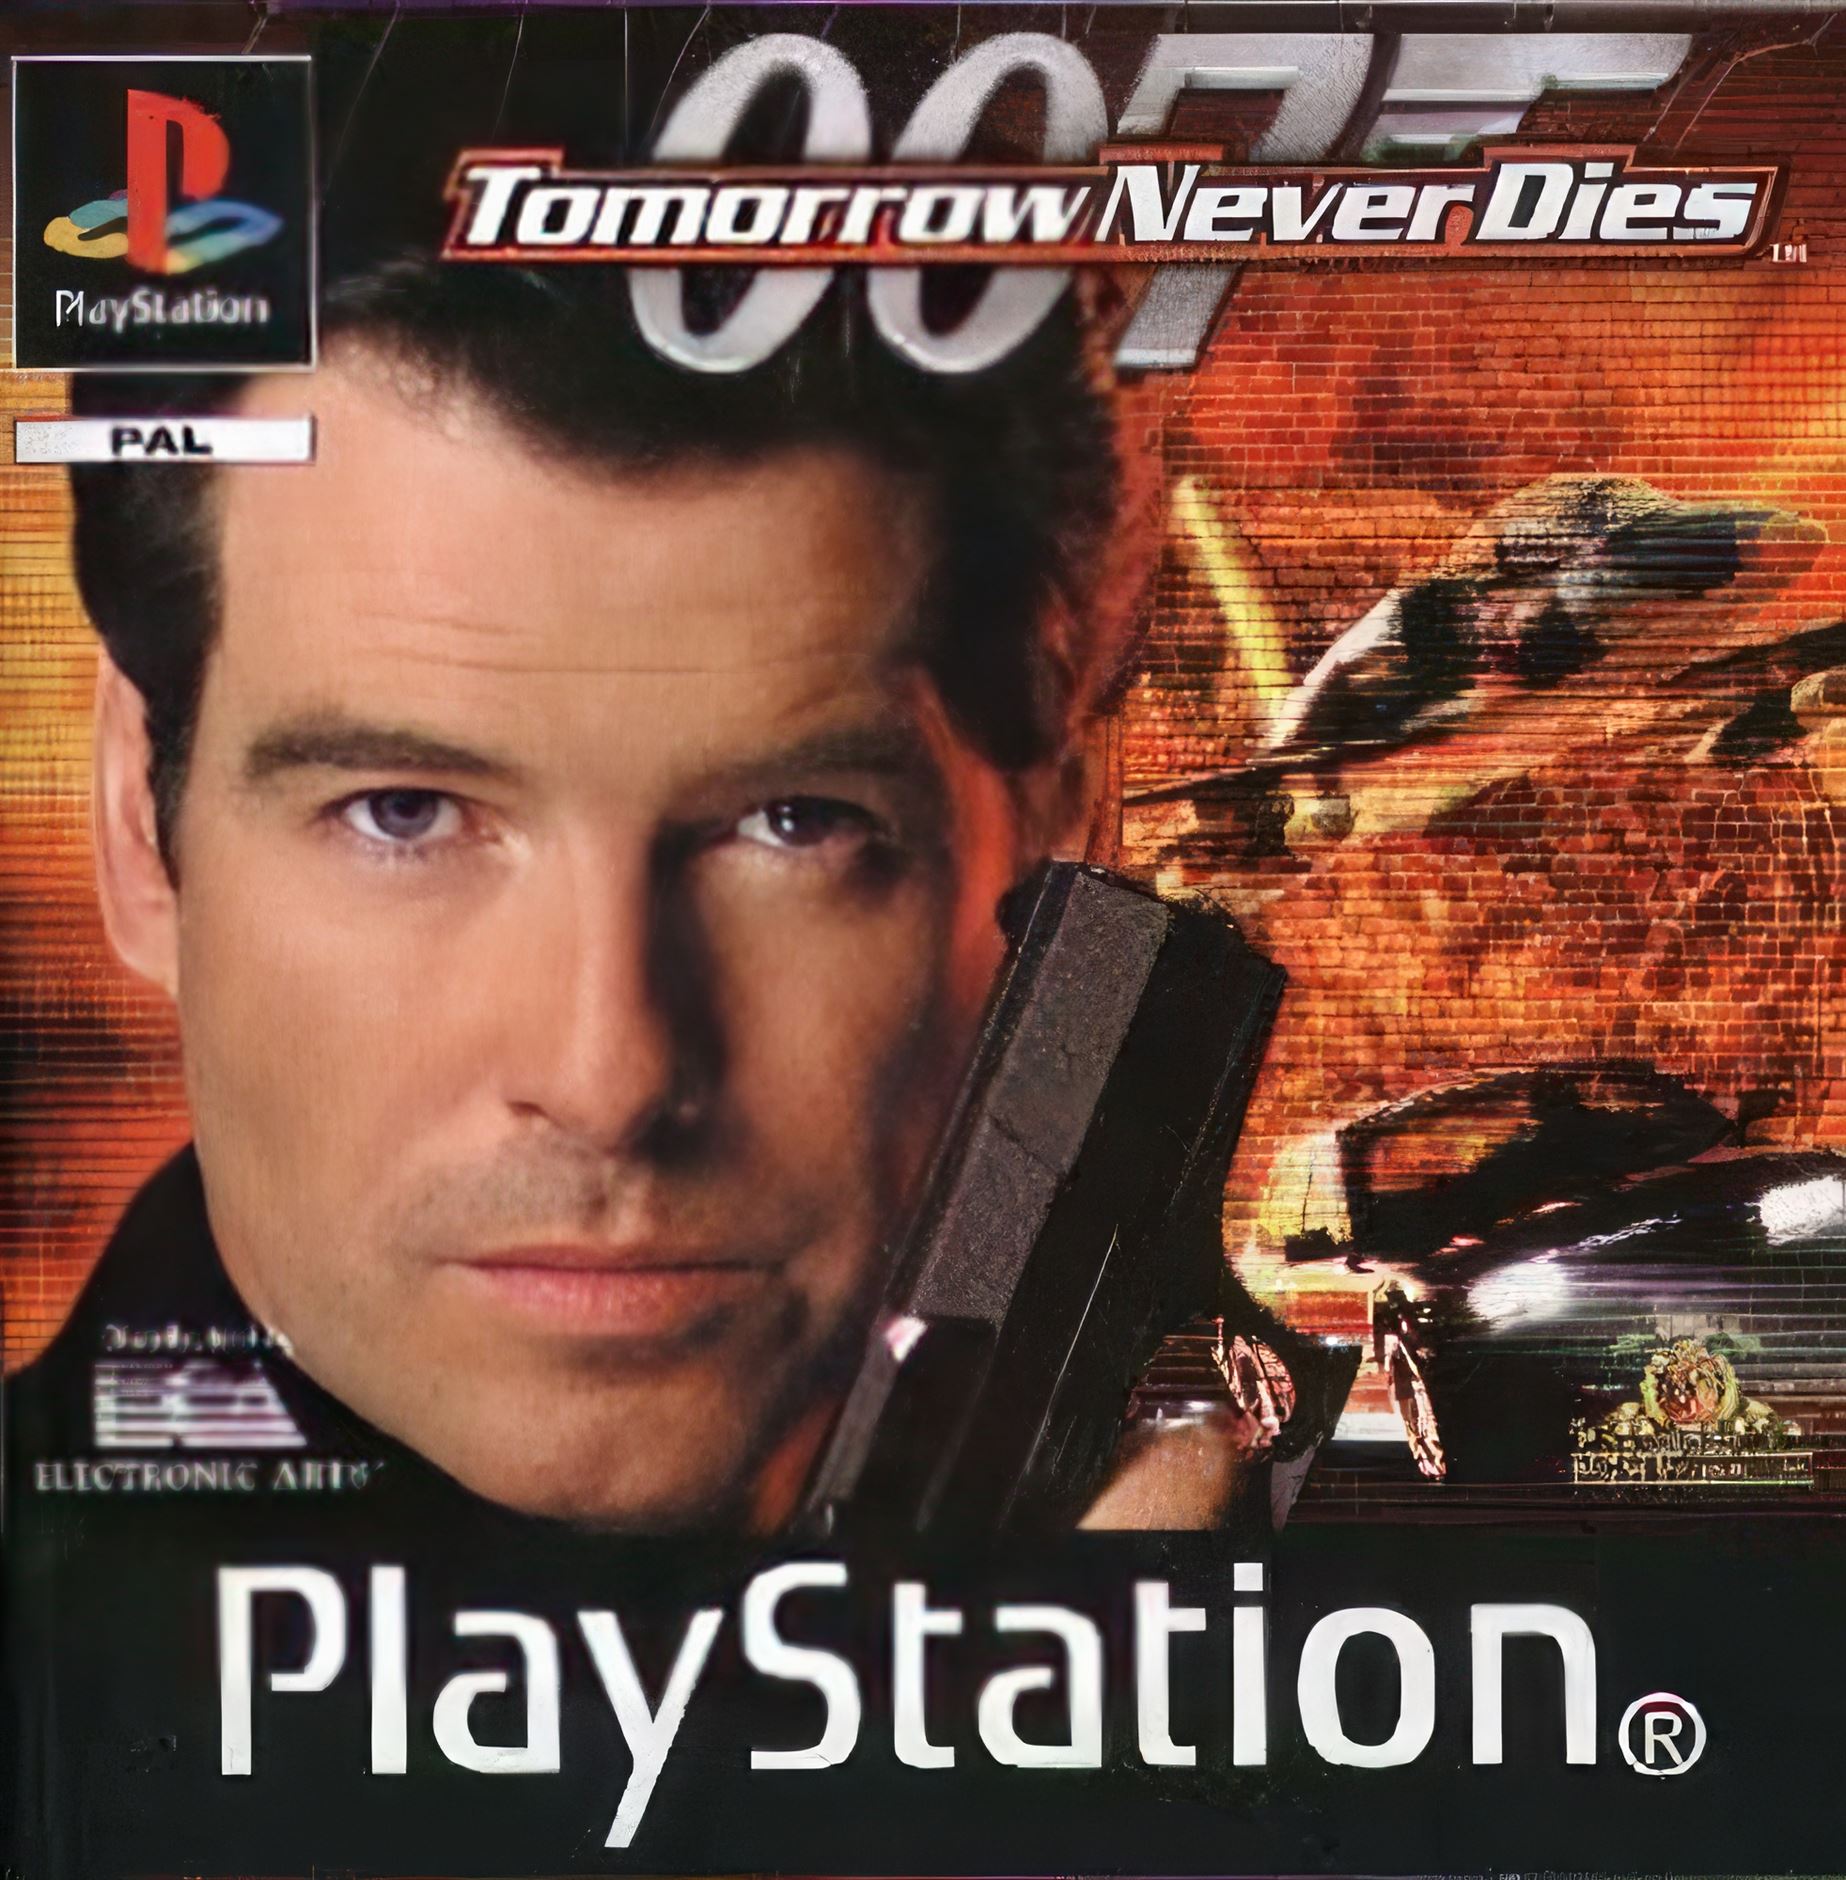 007: Tomorrow Never Dies, for Playstation 1